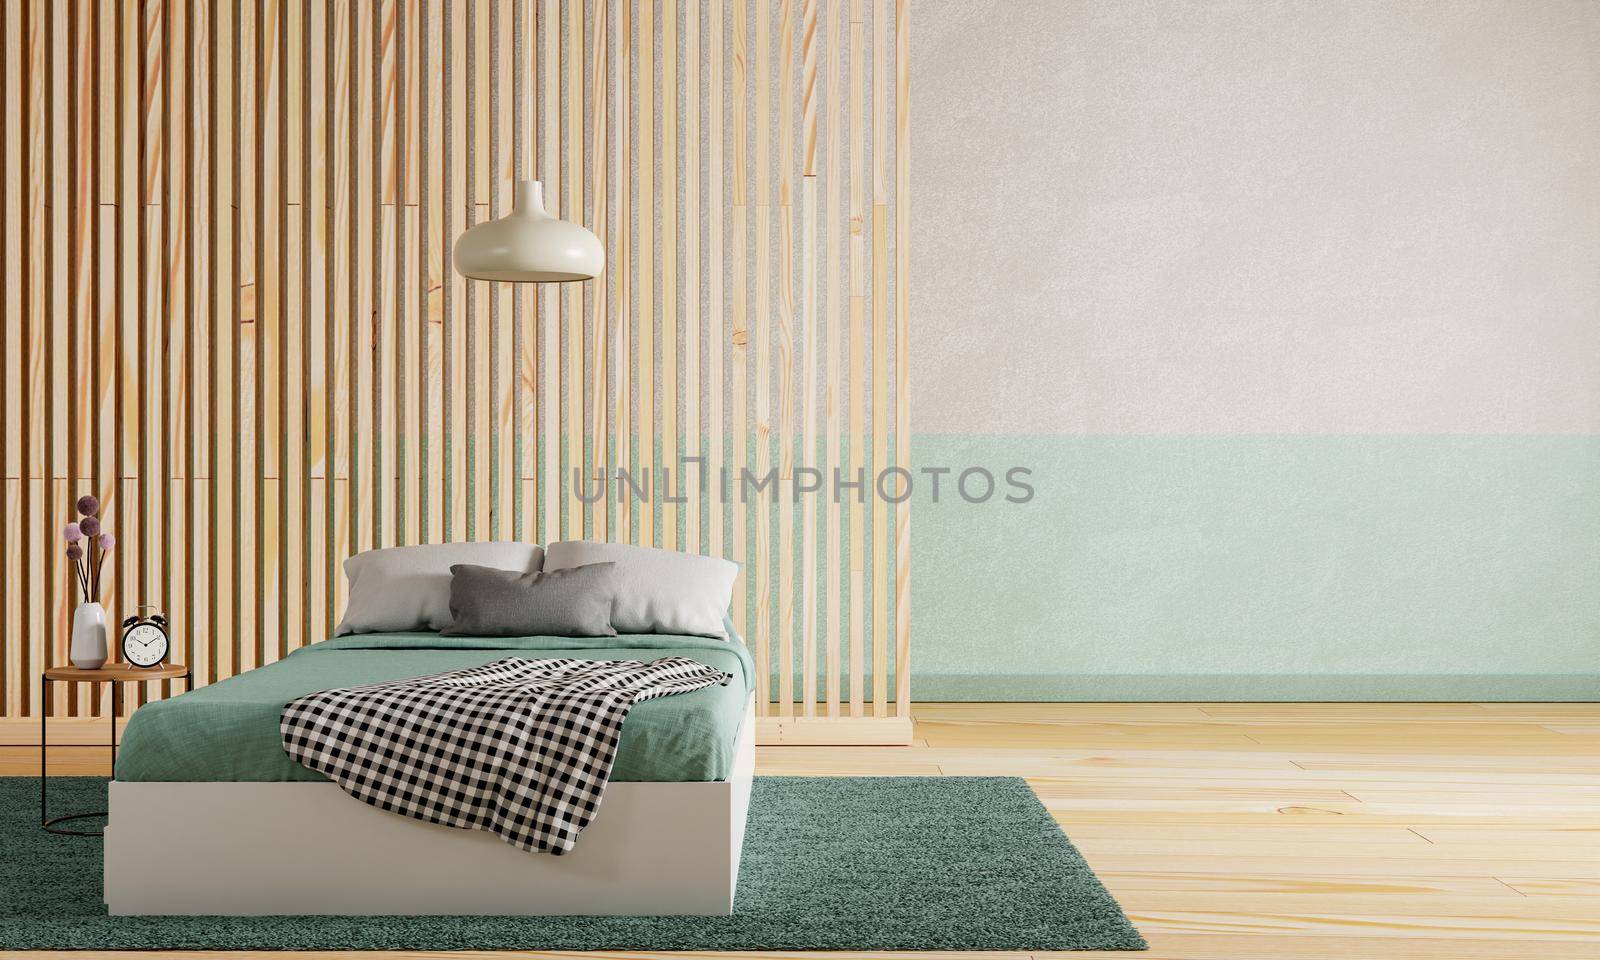 Green bedroom with wooden floor and partition wall and white green color raw concrete background. Interior and Architecture concept. 3D illustration rendering by MiniStocker